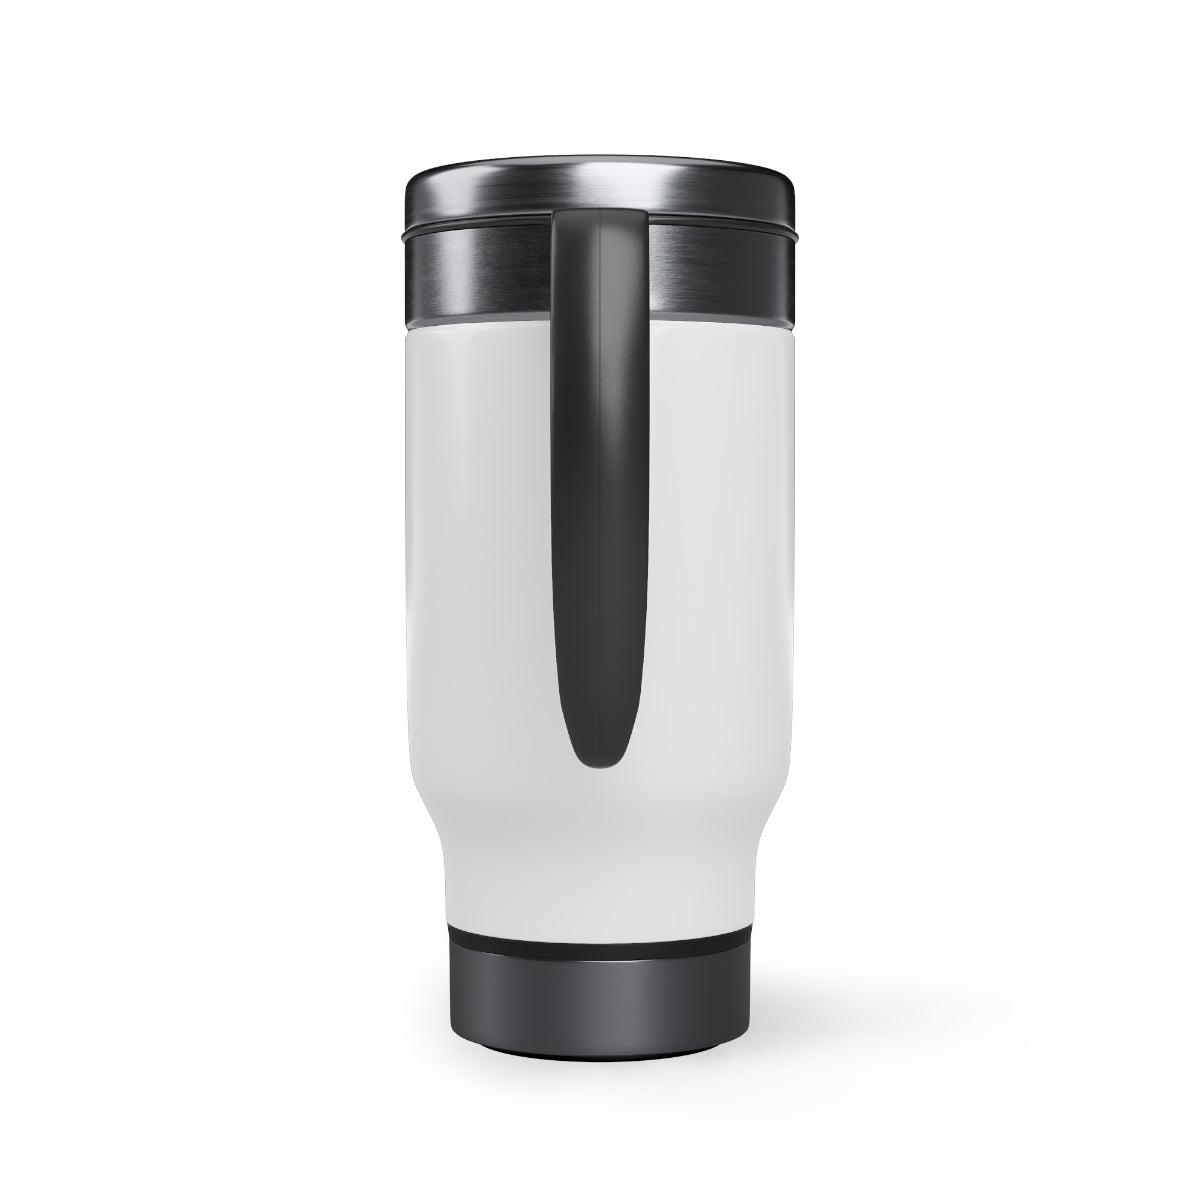 You Are Perfectly Unique! Stainless Steel Travel Mug with Handle, 14oz